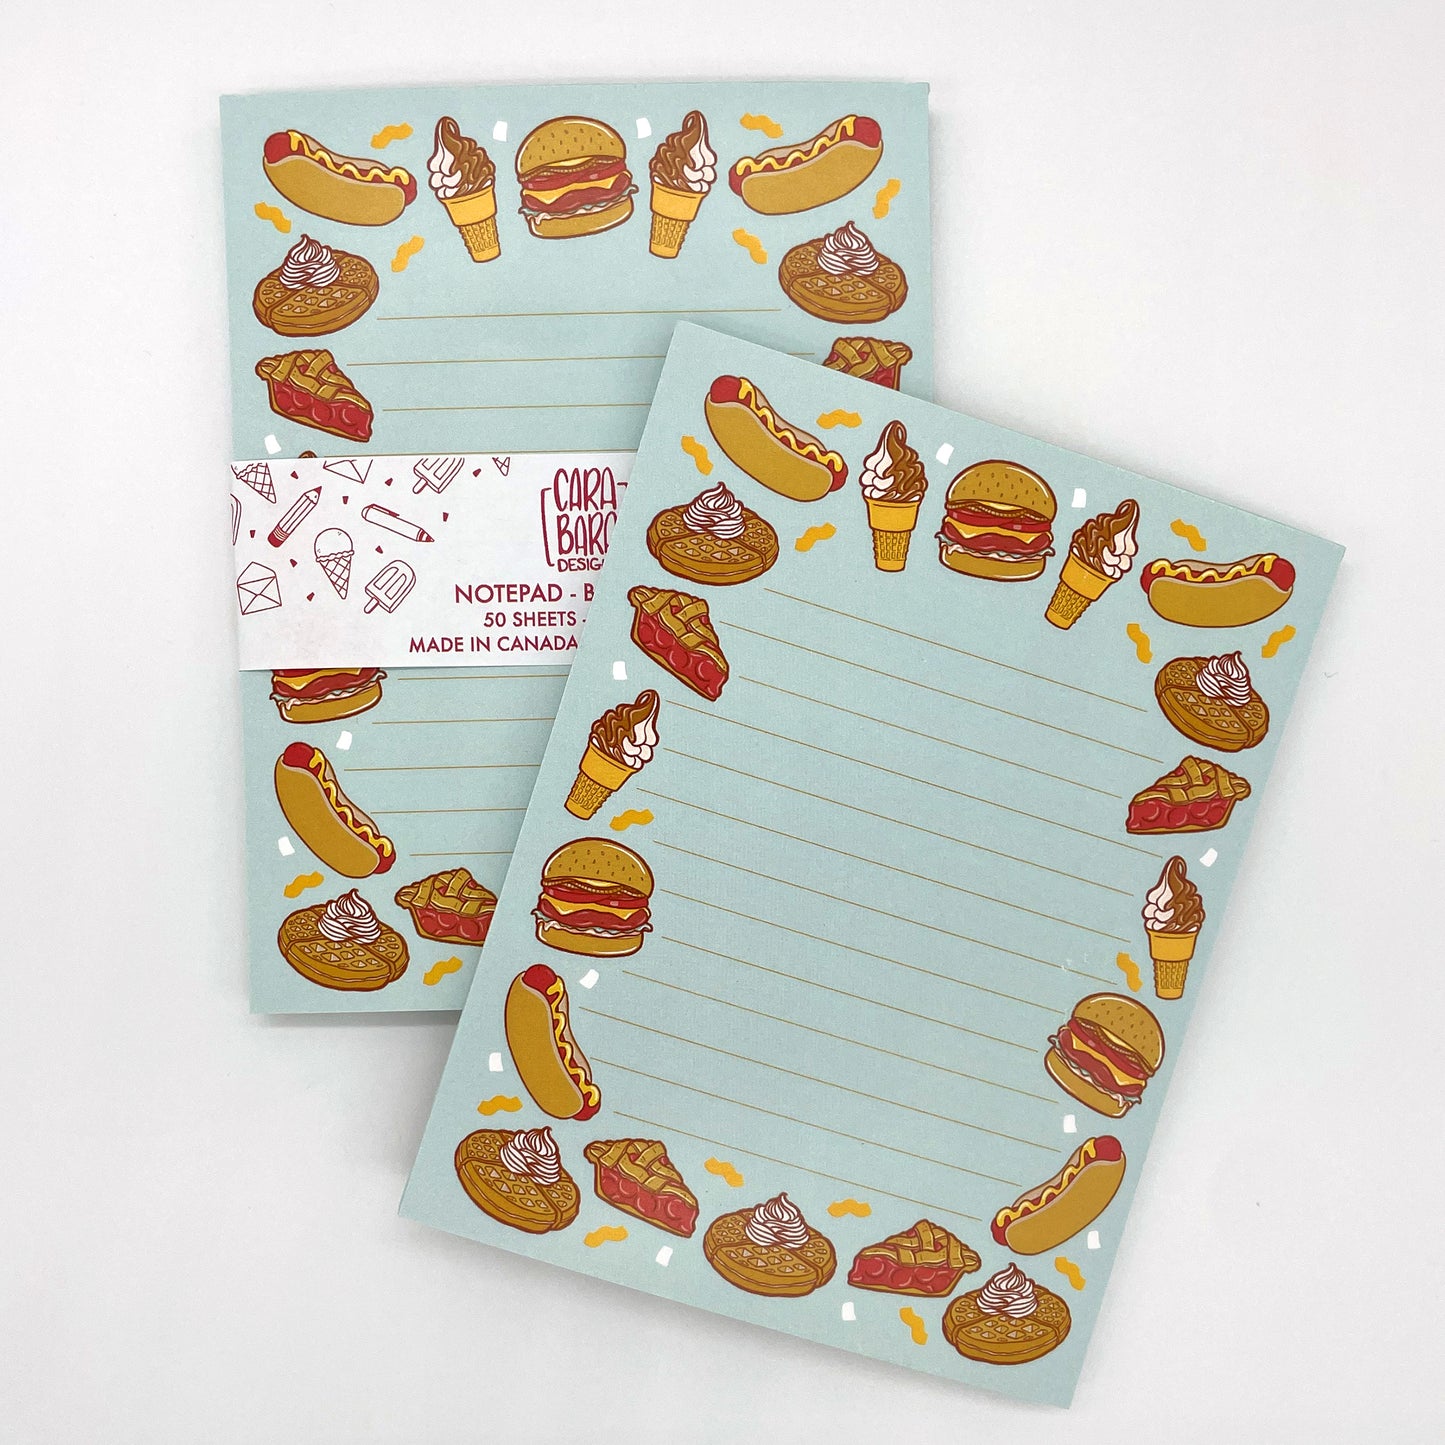 A pair of blue lined notepads feature illustrations of burgers, hot dogs, waffles, ice cream and pie. The back notepad is packaged in a belly band with the Carabara Designs logo, indicating the notepad is 50 pages and made in Canada.